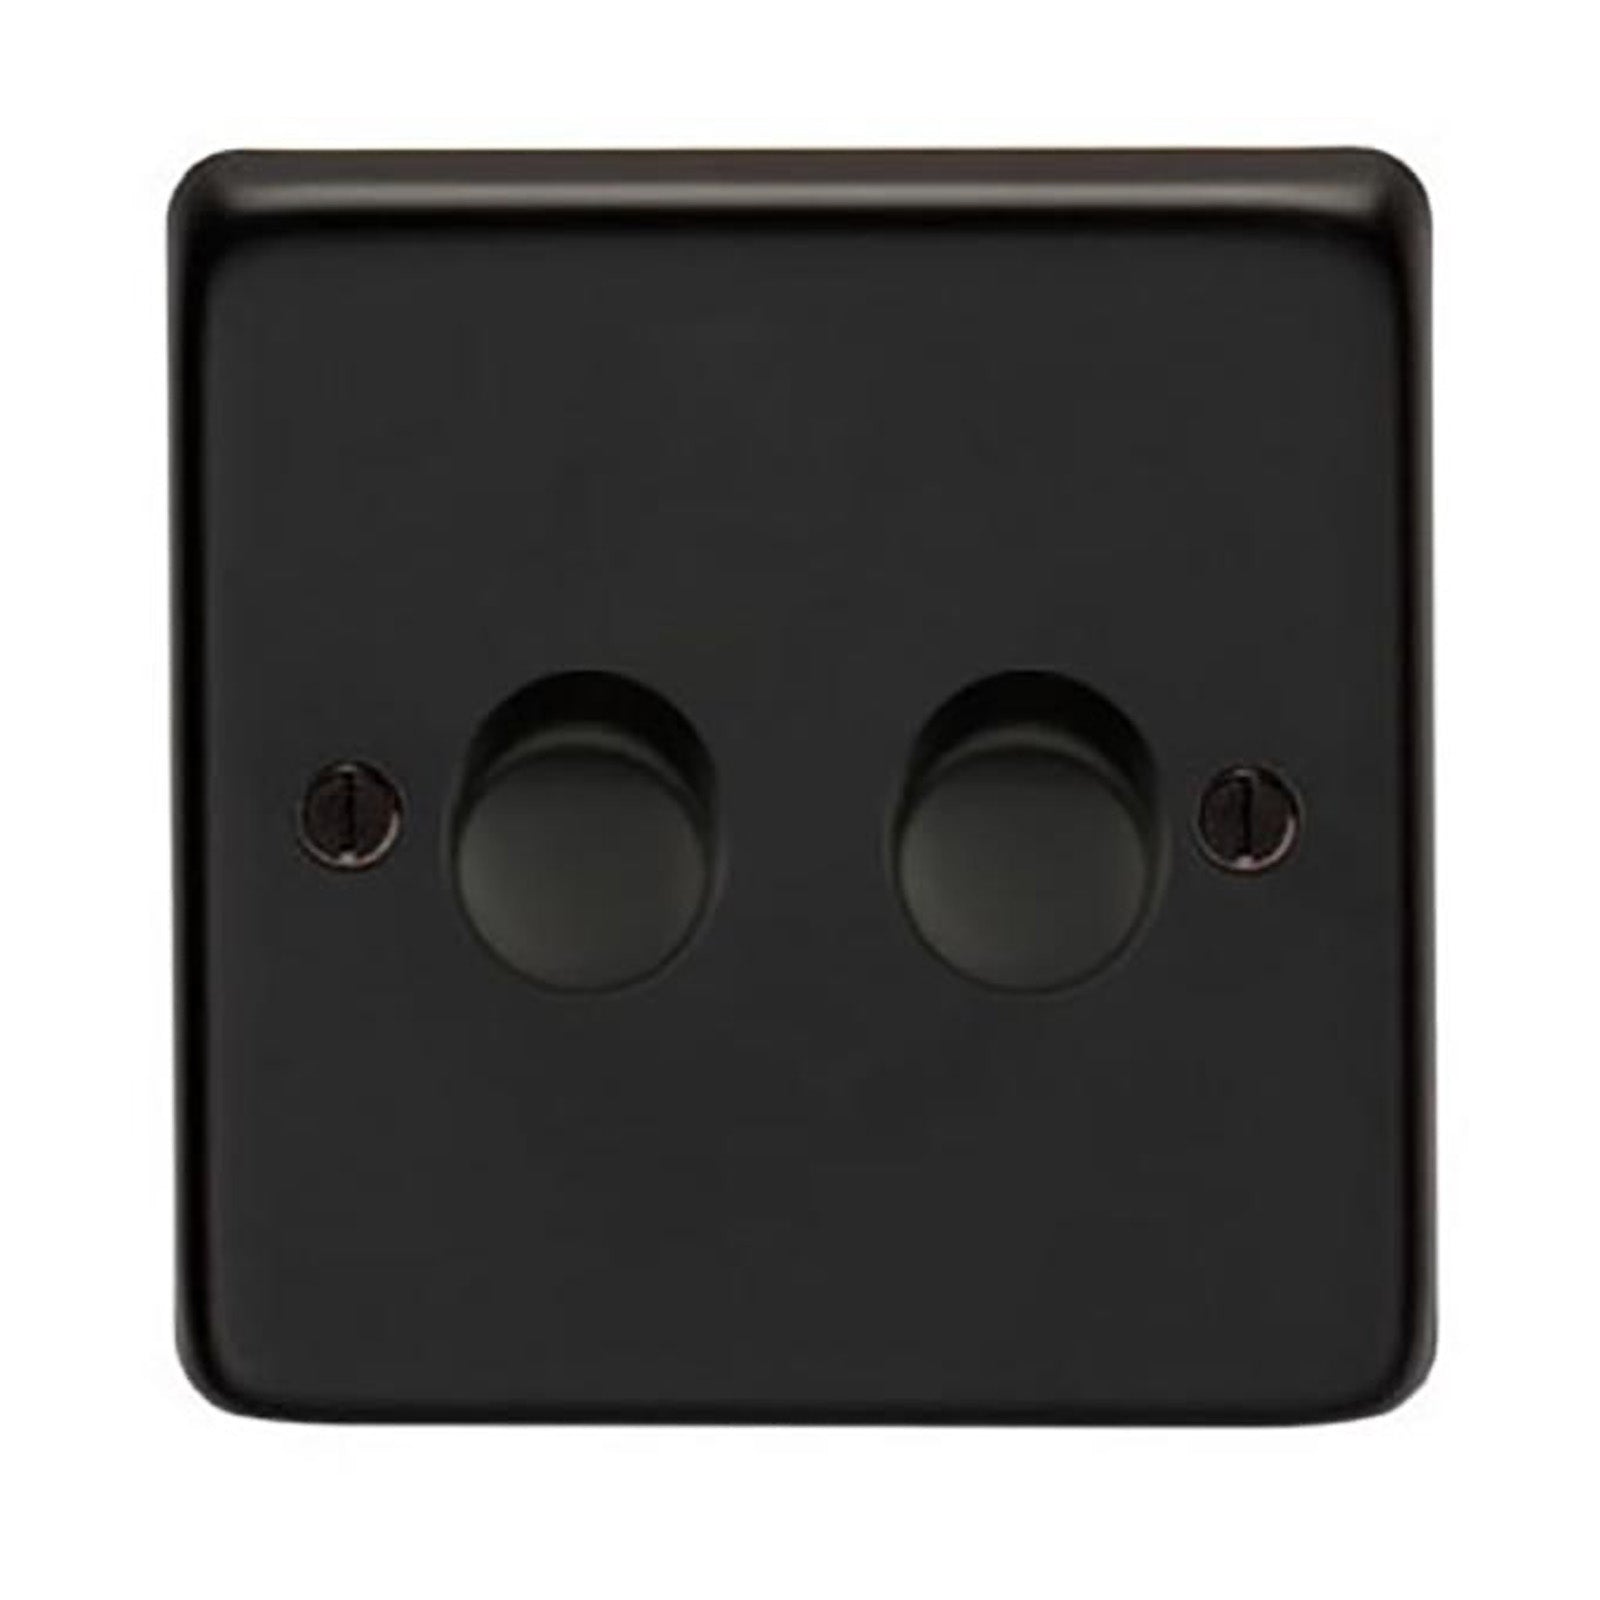 SHOW Image of Double LED Dimmer Switch with Matt Black finish